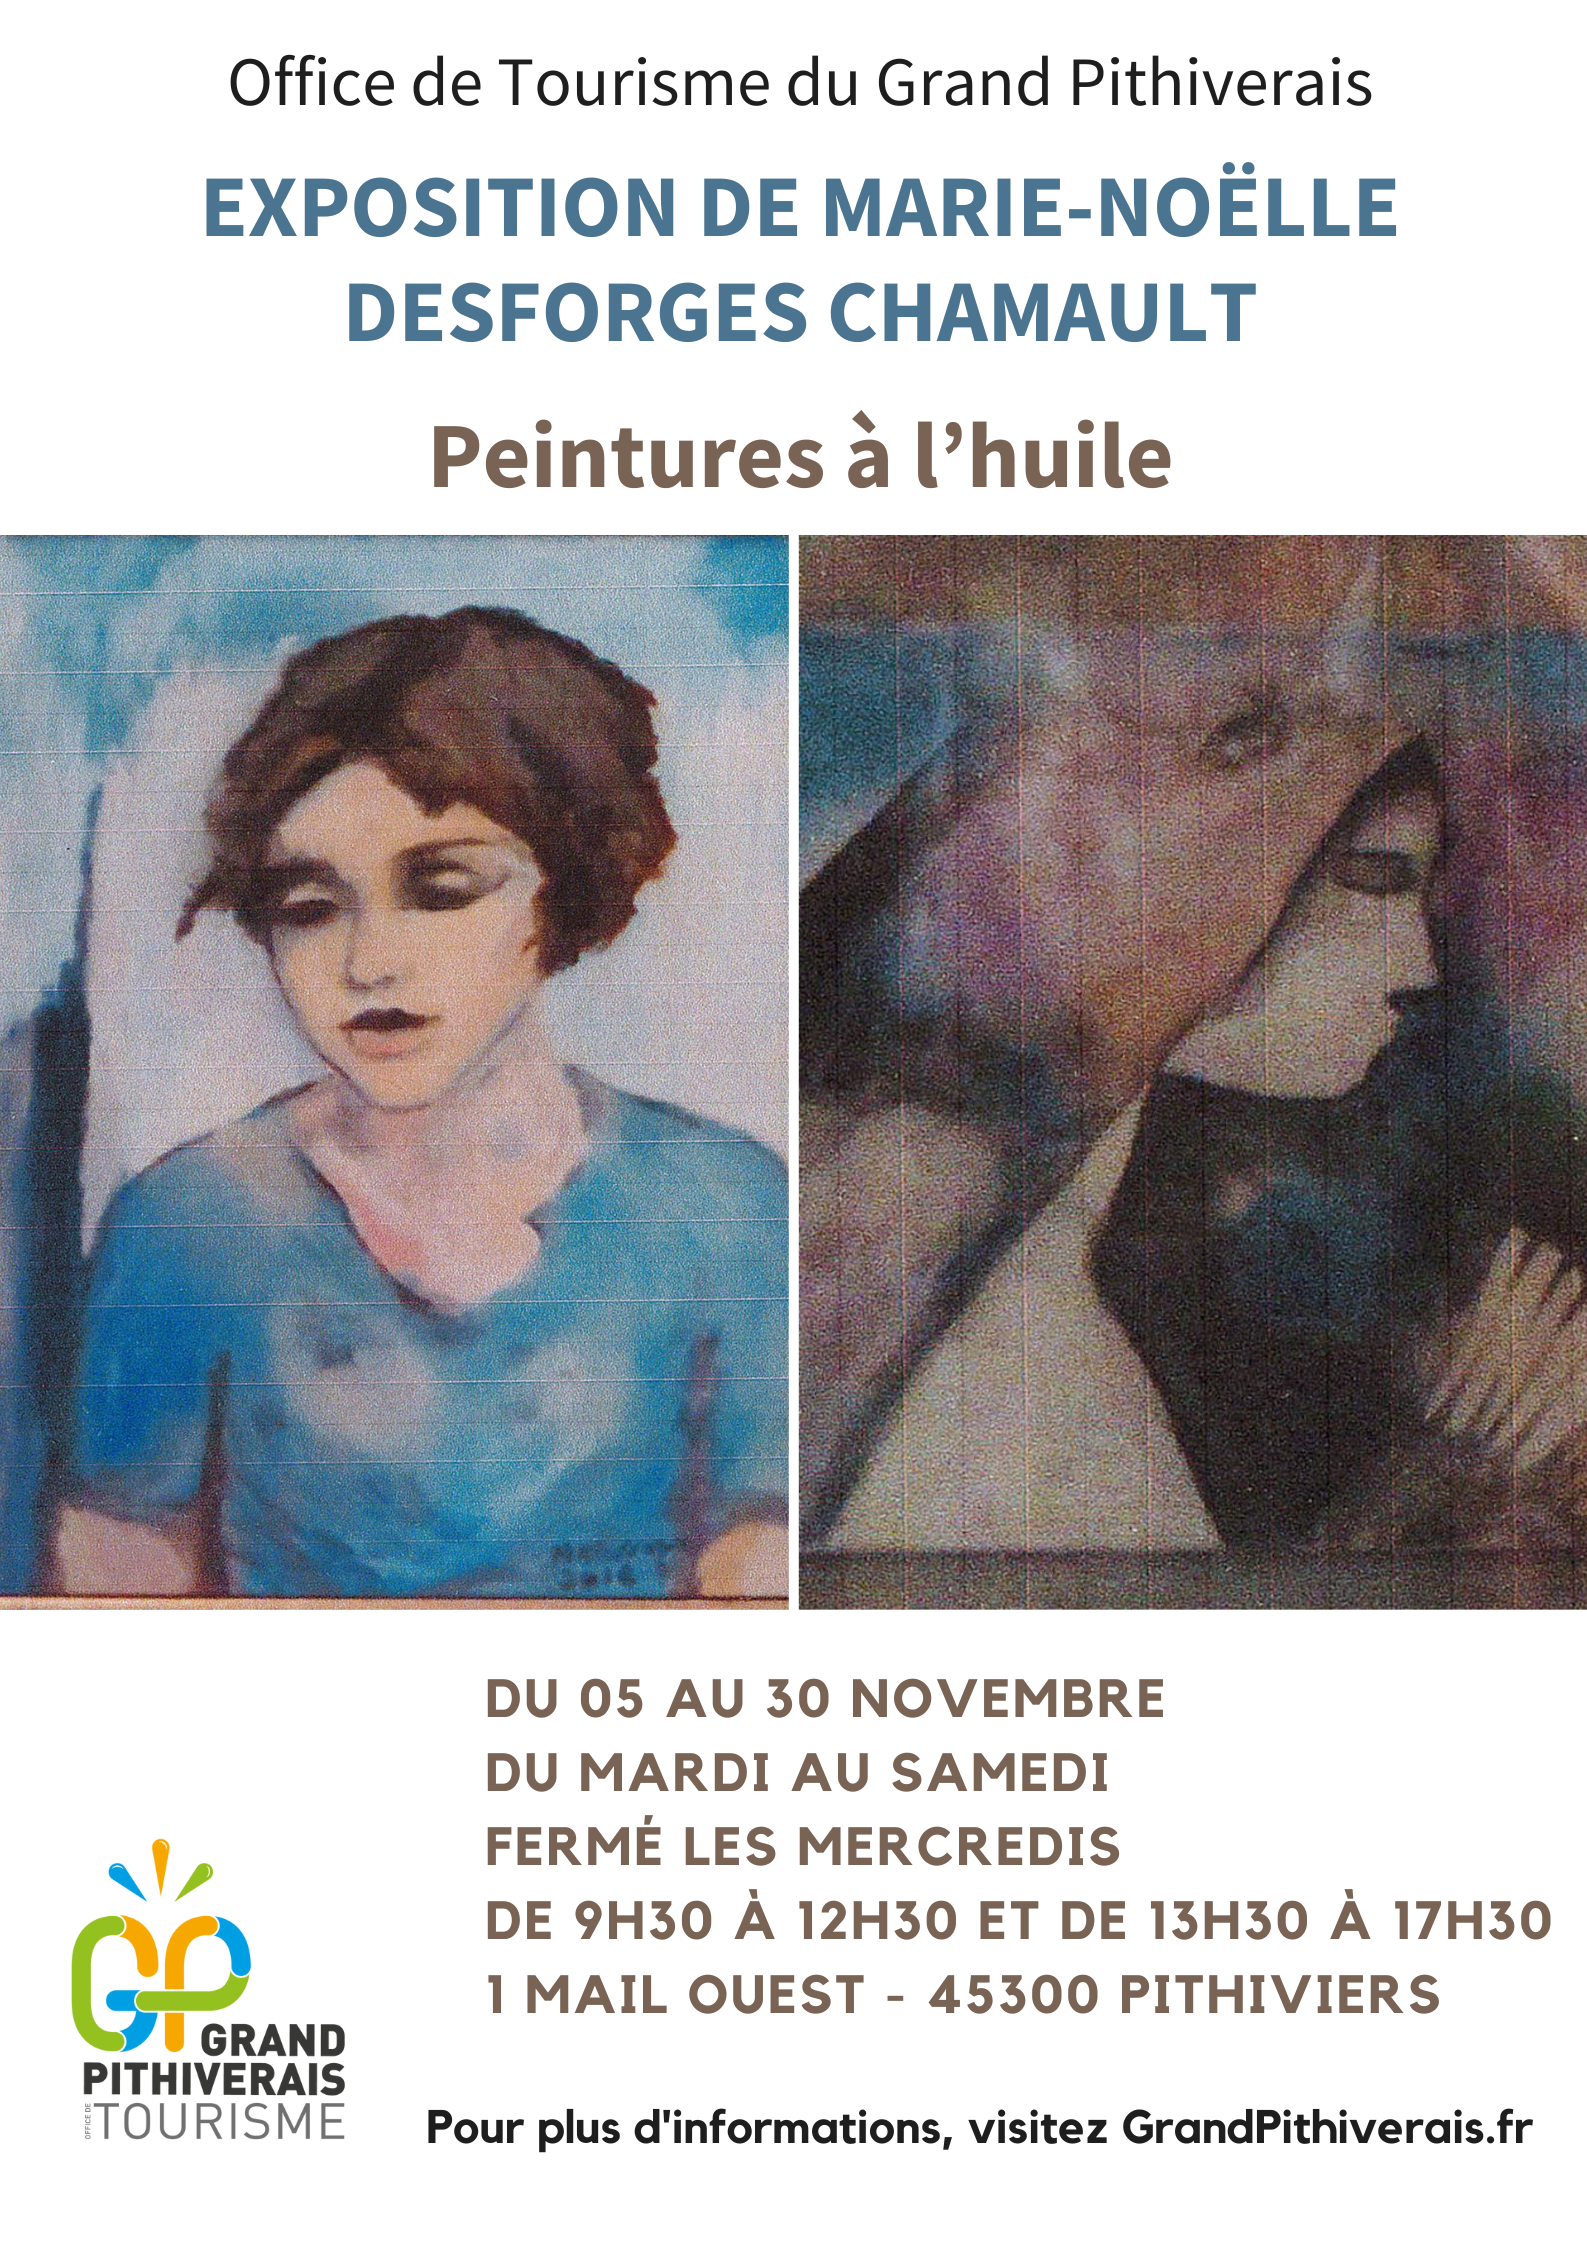 Exposition de peintures de Marie-Noëlle Desforges Chamault null France null null null null